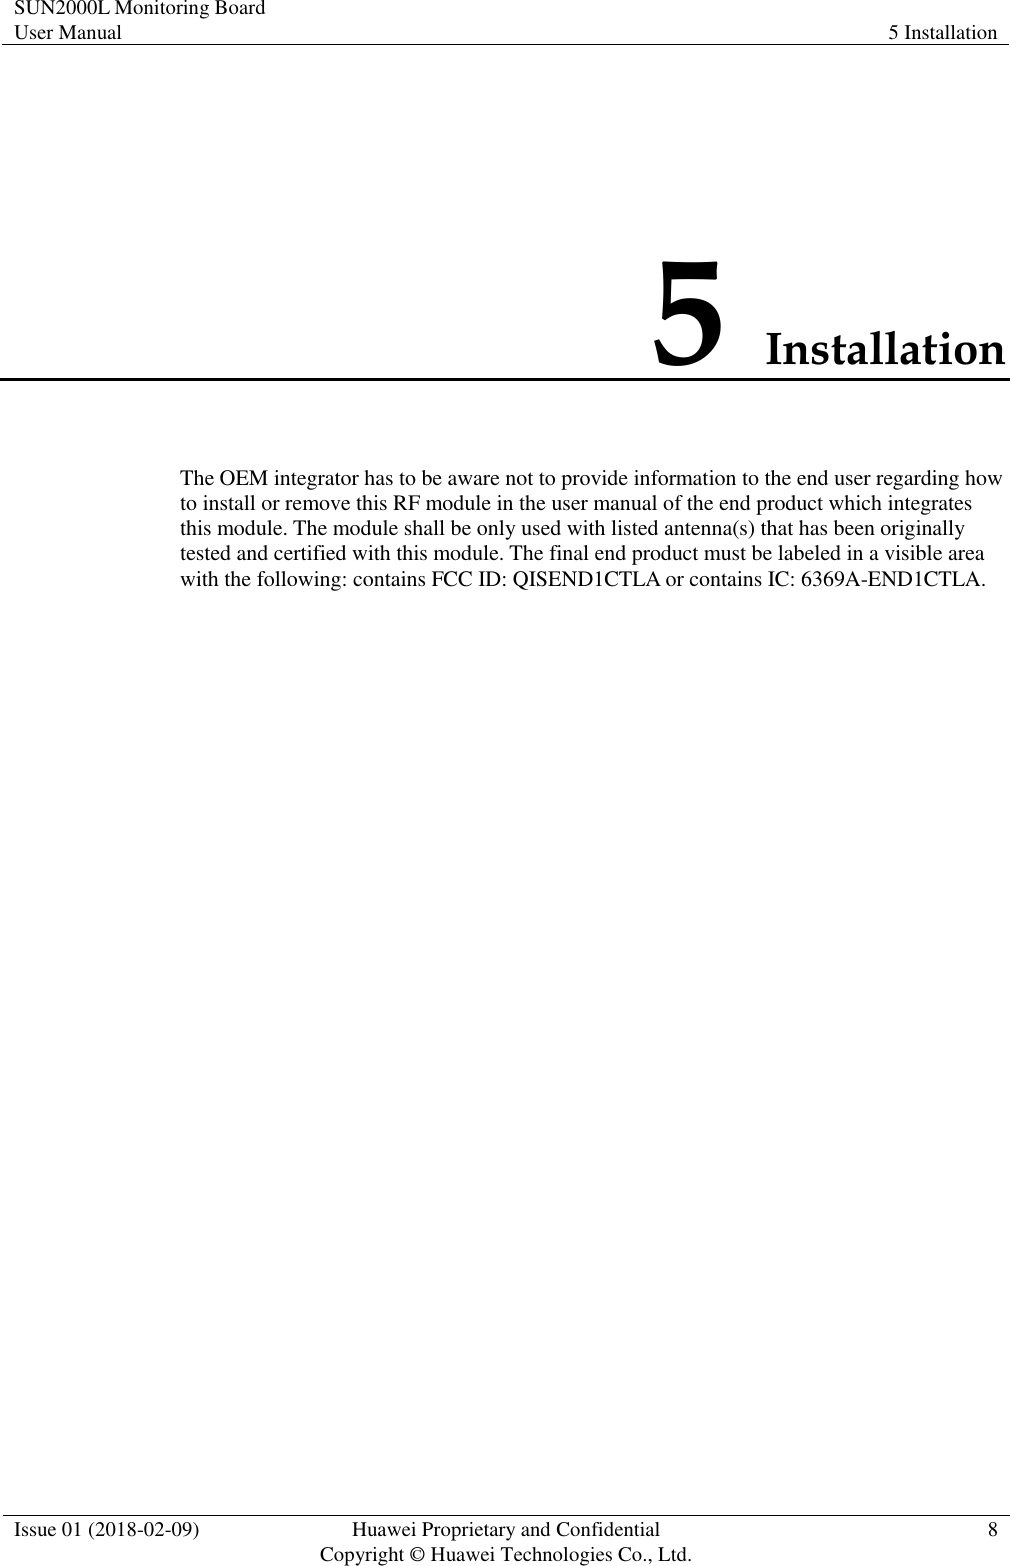 SUN2000L Monitoring Board User Manual 5 Installation  Issue 01 (2018-02-09)  Huawei Proprietary and Confidential                     Copyright © Huawei Technologies Co., Ltd. 8  5 Installation The OEM integrator has to be aware not to provide information to the end user regarding how to install or remove this RF module in the user manual of the end product which integrates this module. The module shall be only used with listed antenna(s) that has been originally tested and certified with this module. The final end product must be labeled in a visible area with the following: contains FCC ID: QISEND1CTLA or contains IC: 6369A-END1CTLA. 